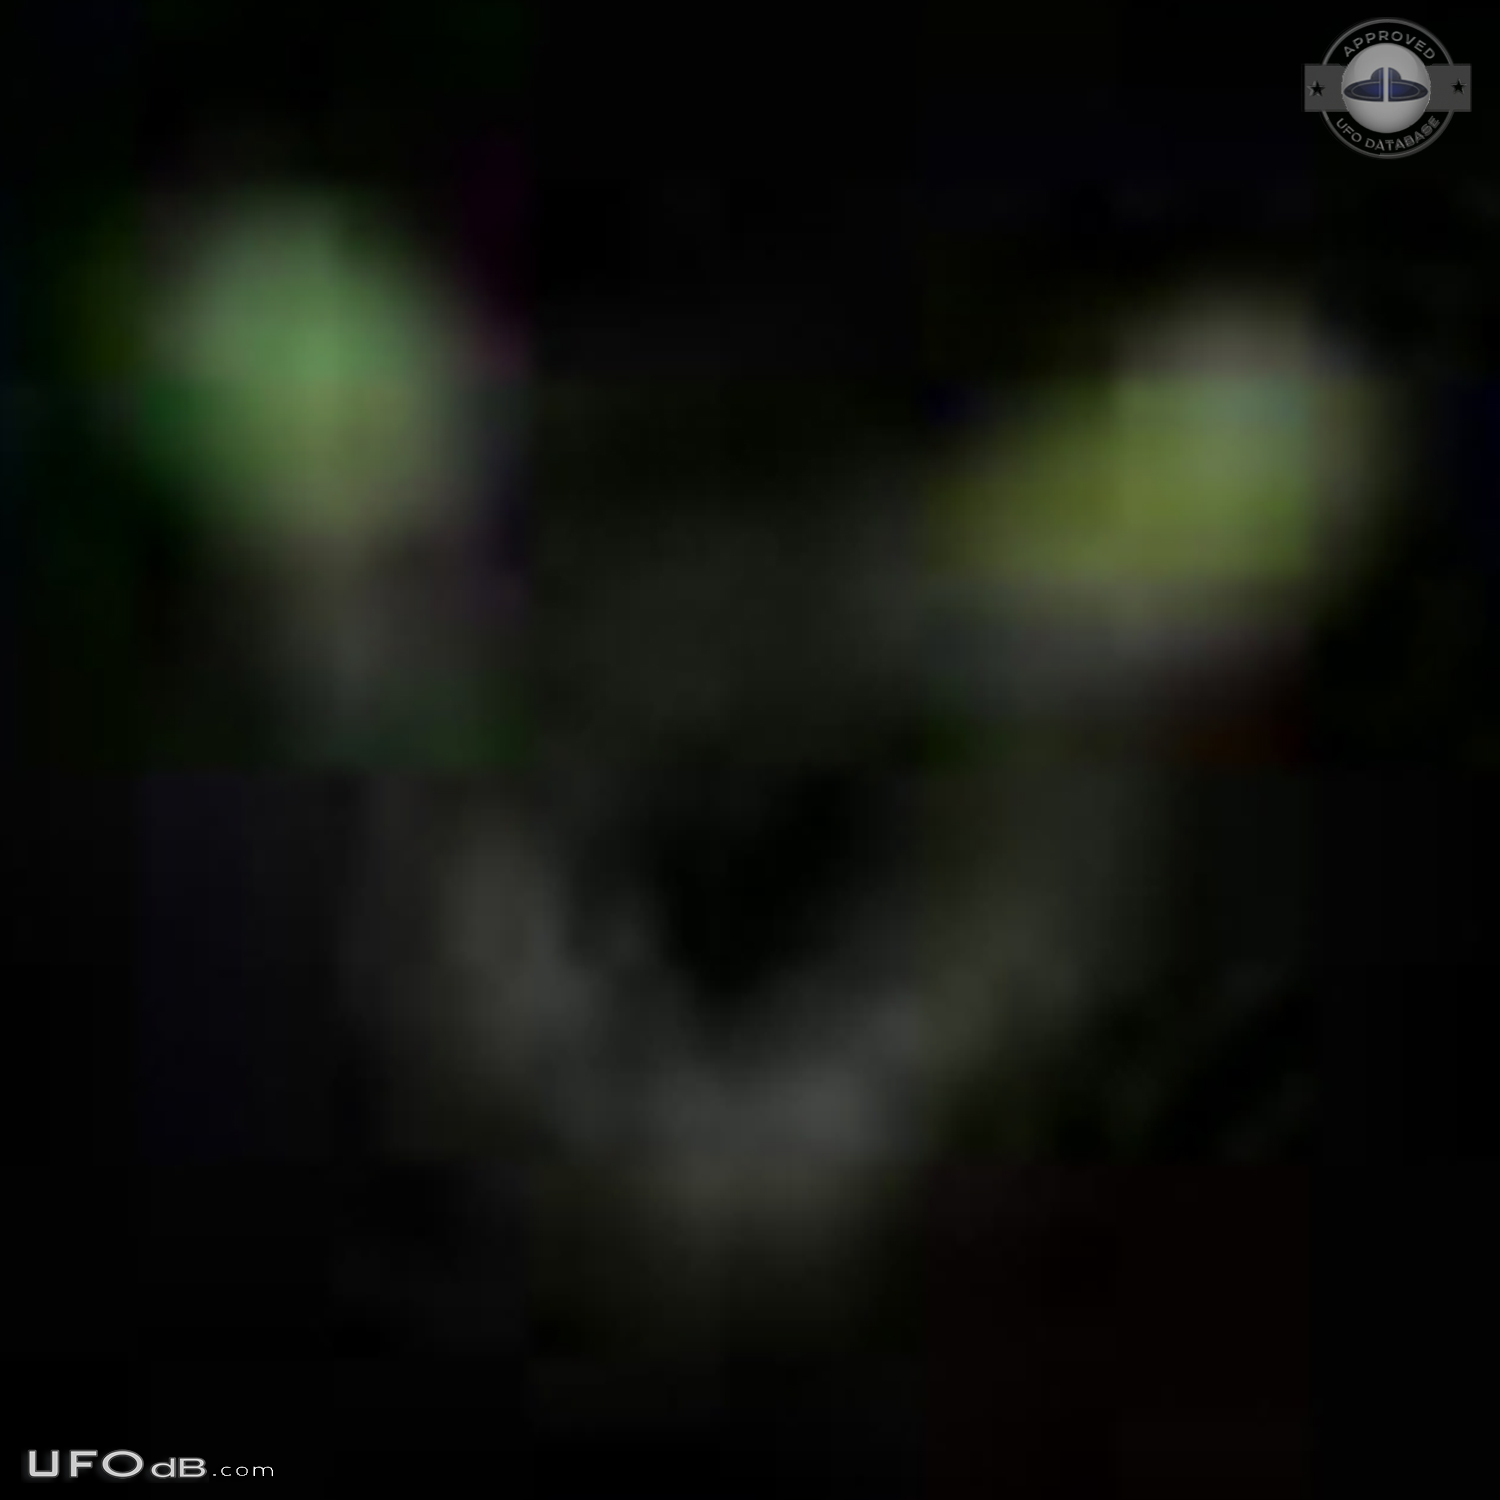 Circular UFO with 2 glowing green lights seen in Huddersfield UK 2011 UFO Picture #688-4